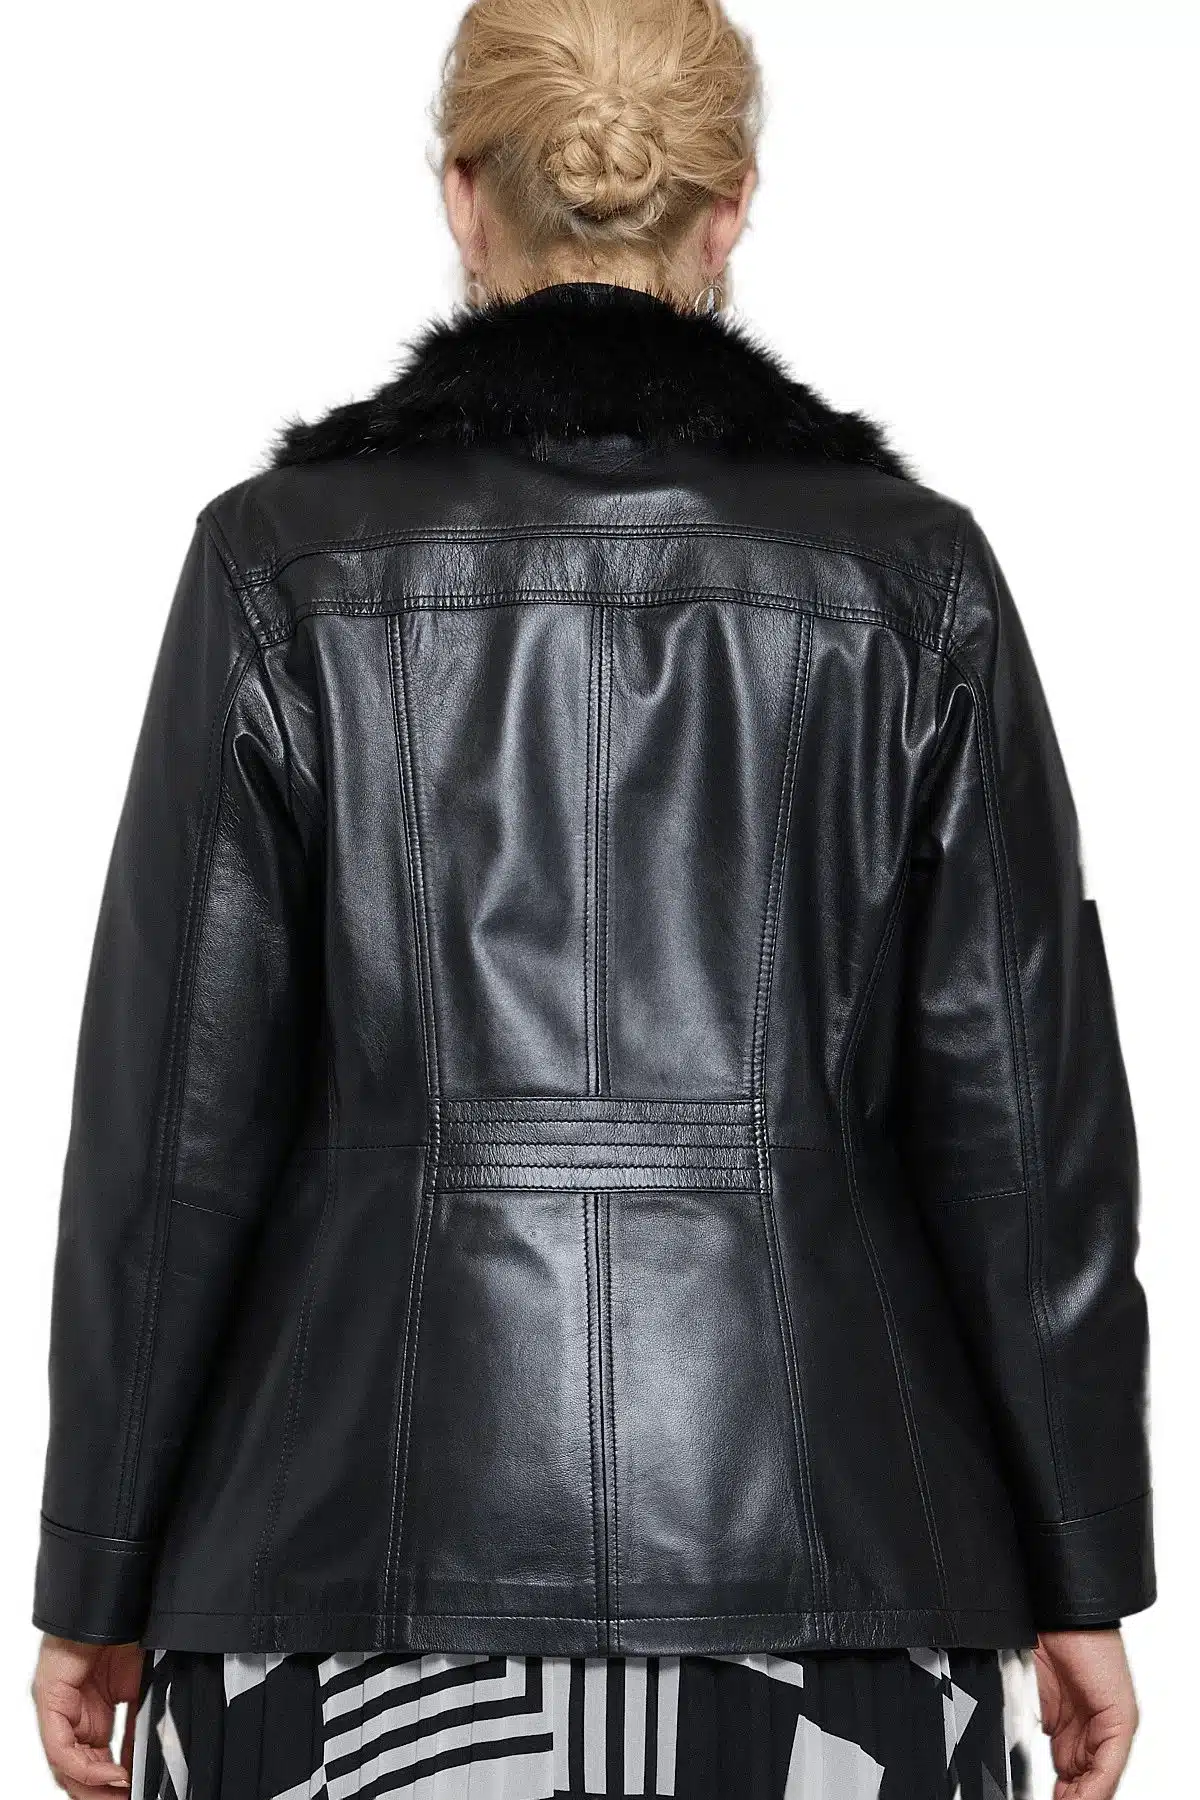 Lona Women’s Furry Collar Leather Jacket in Black (4)_result